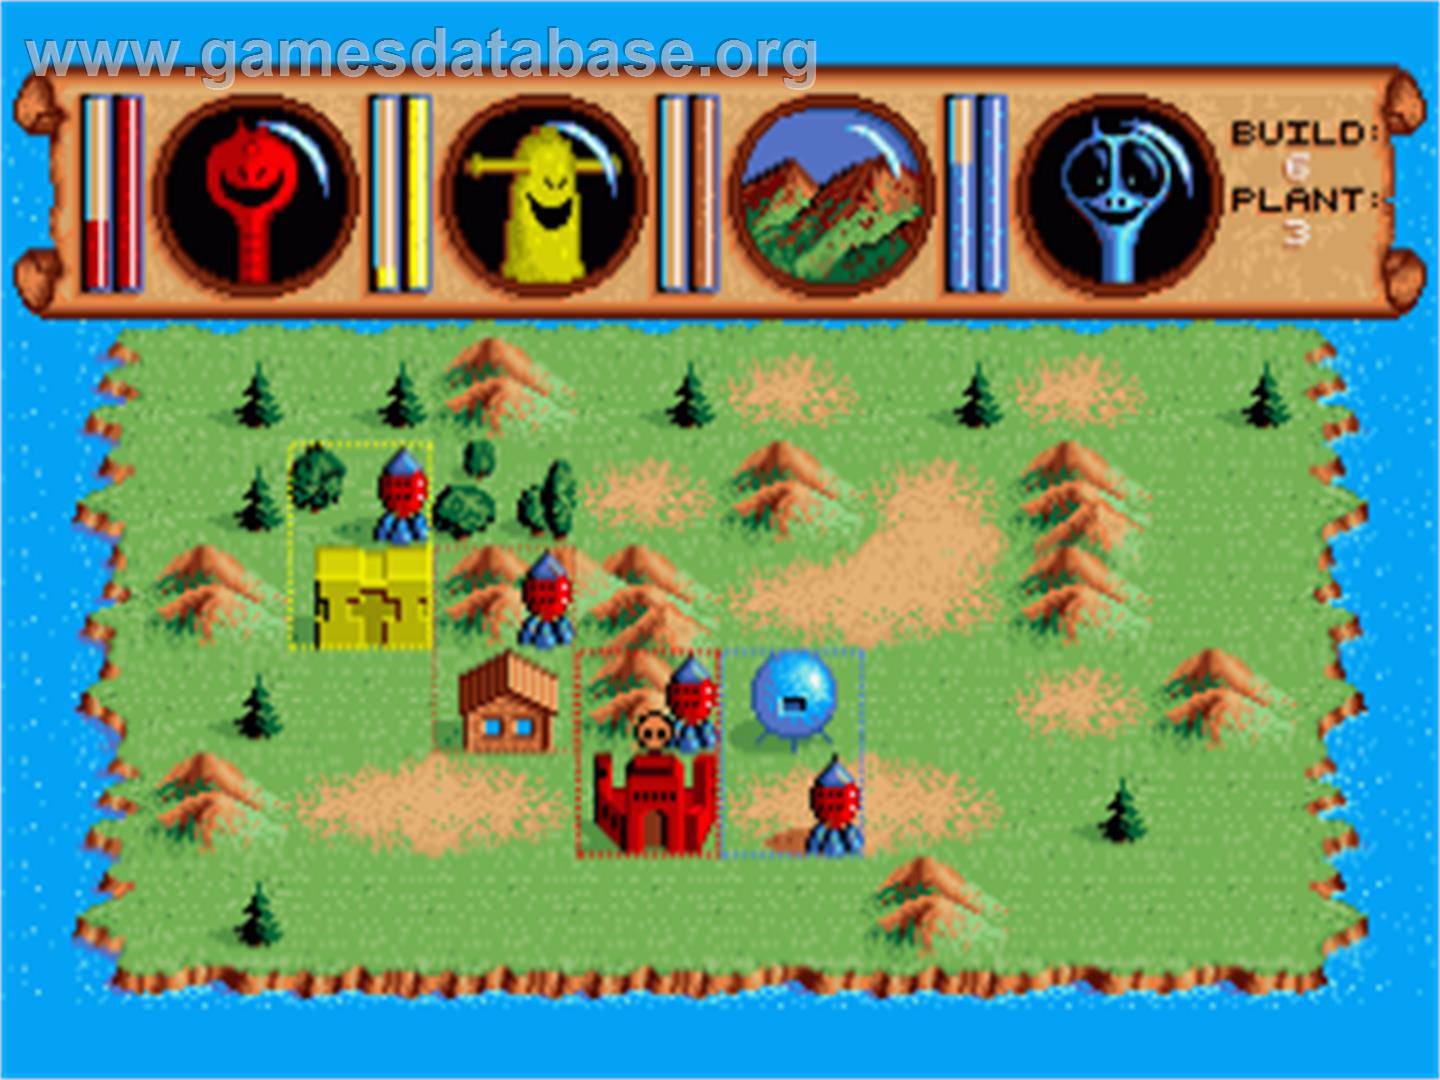 Traders: The Intergalactic Trading Game - Commodore Amiga - Artwork - In Game